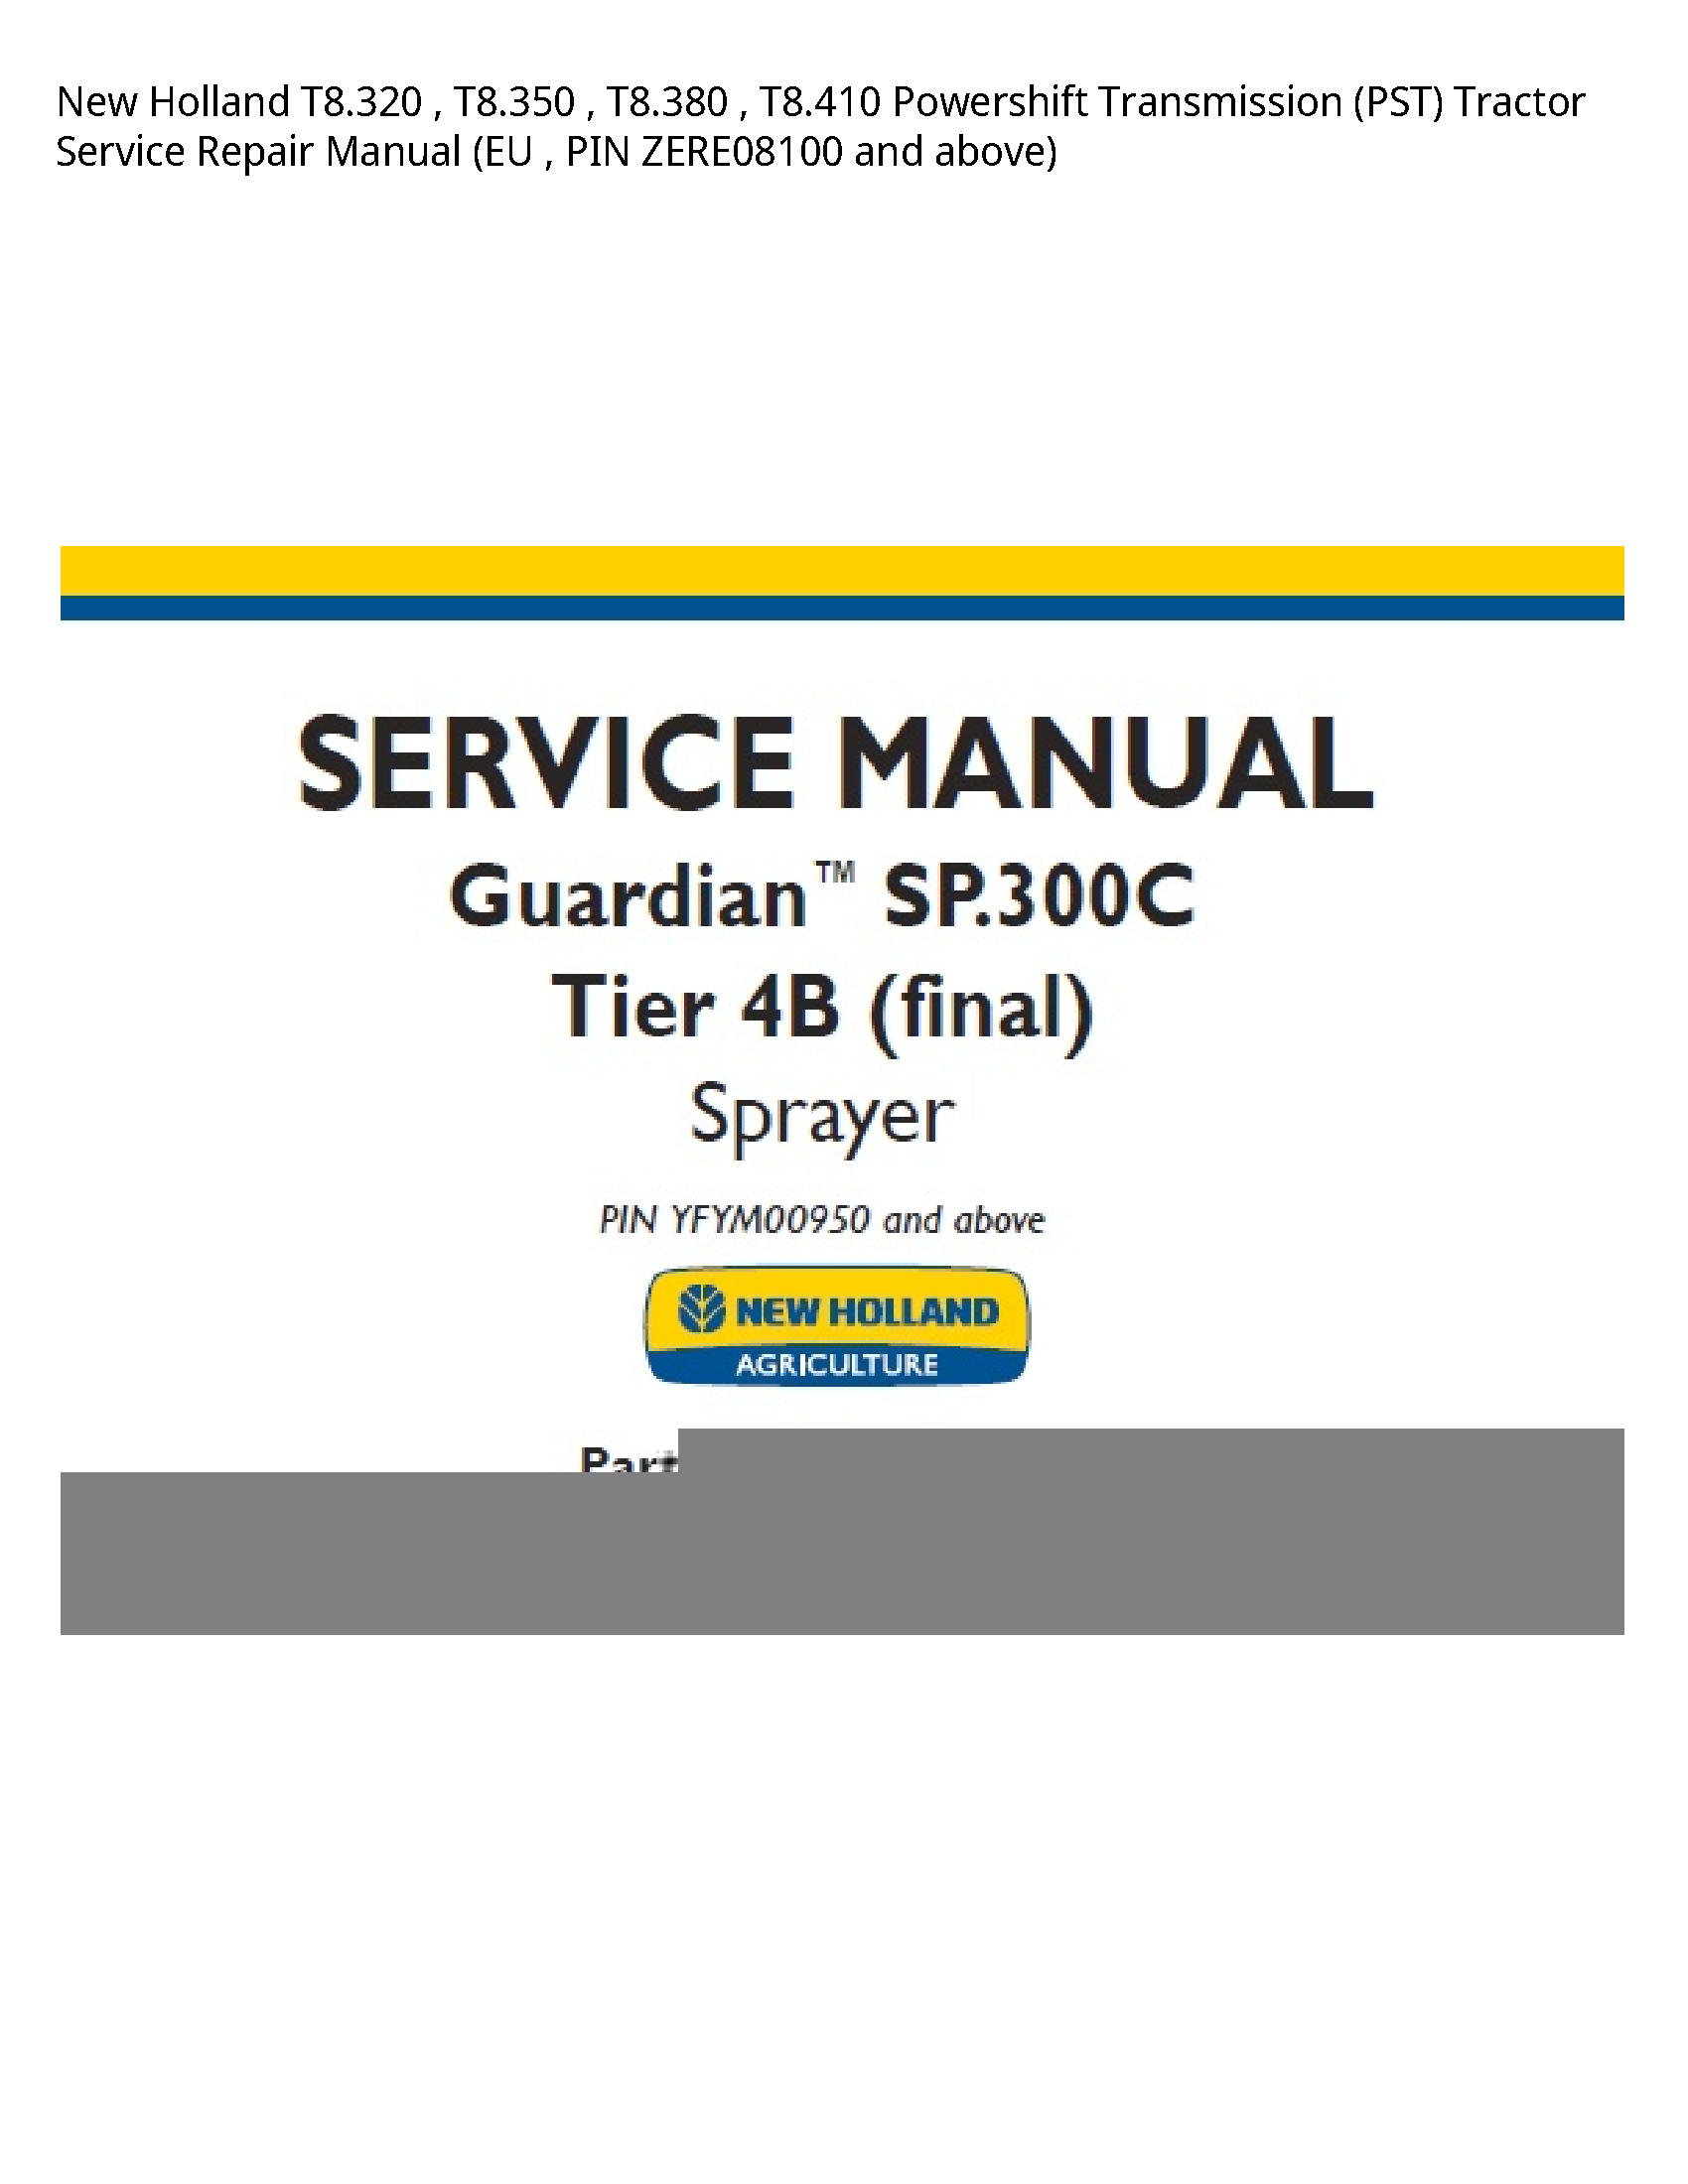 New Holland T8.320 Powershift Transmission (PST) Tractor manual